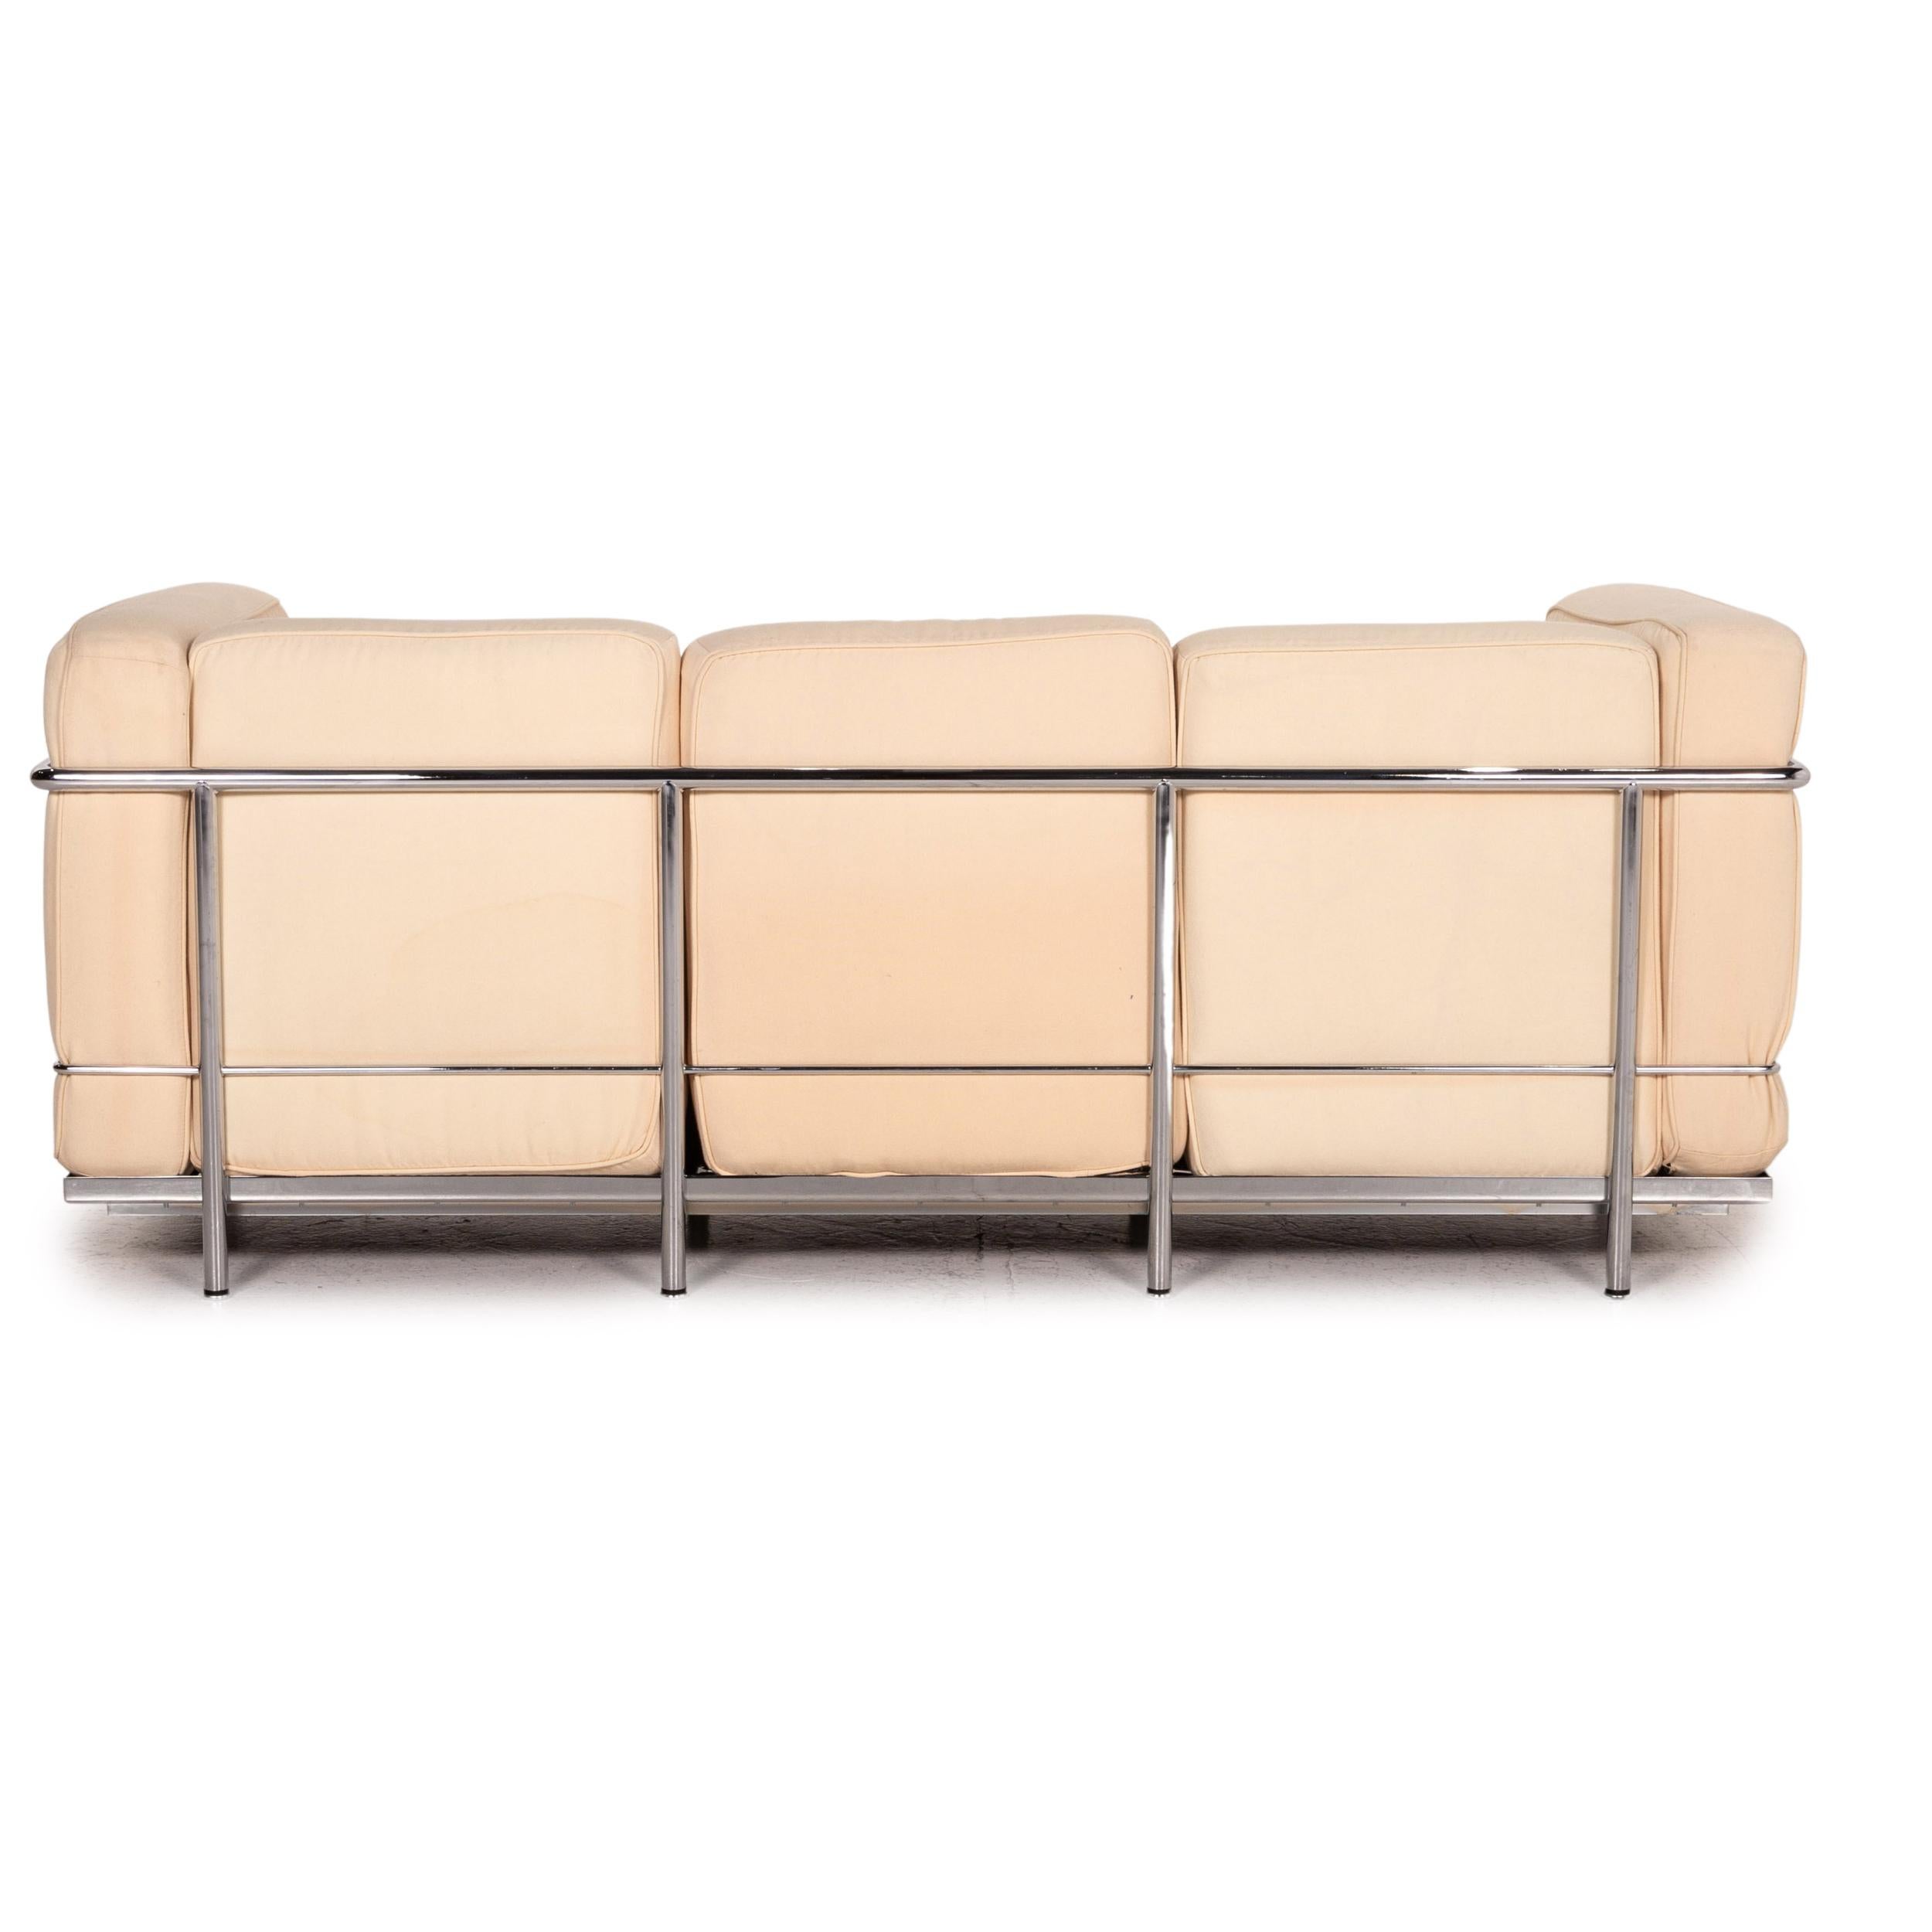 Cassina LC 4 Le Corbusier Fabric Sofa Set Beige 1x Three-Seater 1x Two-Seater 10